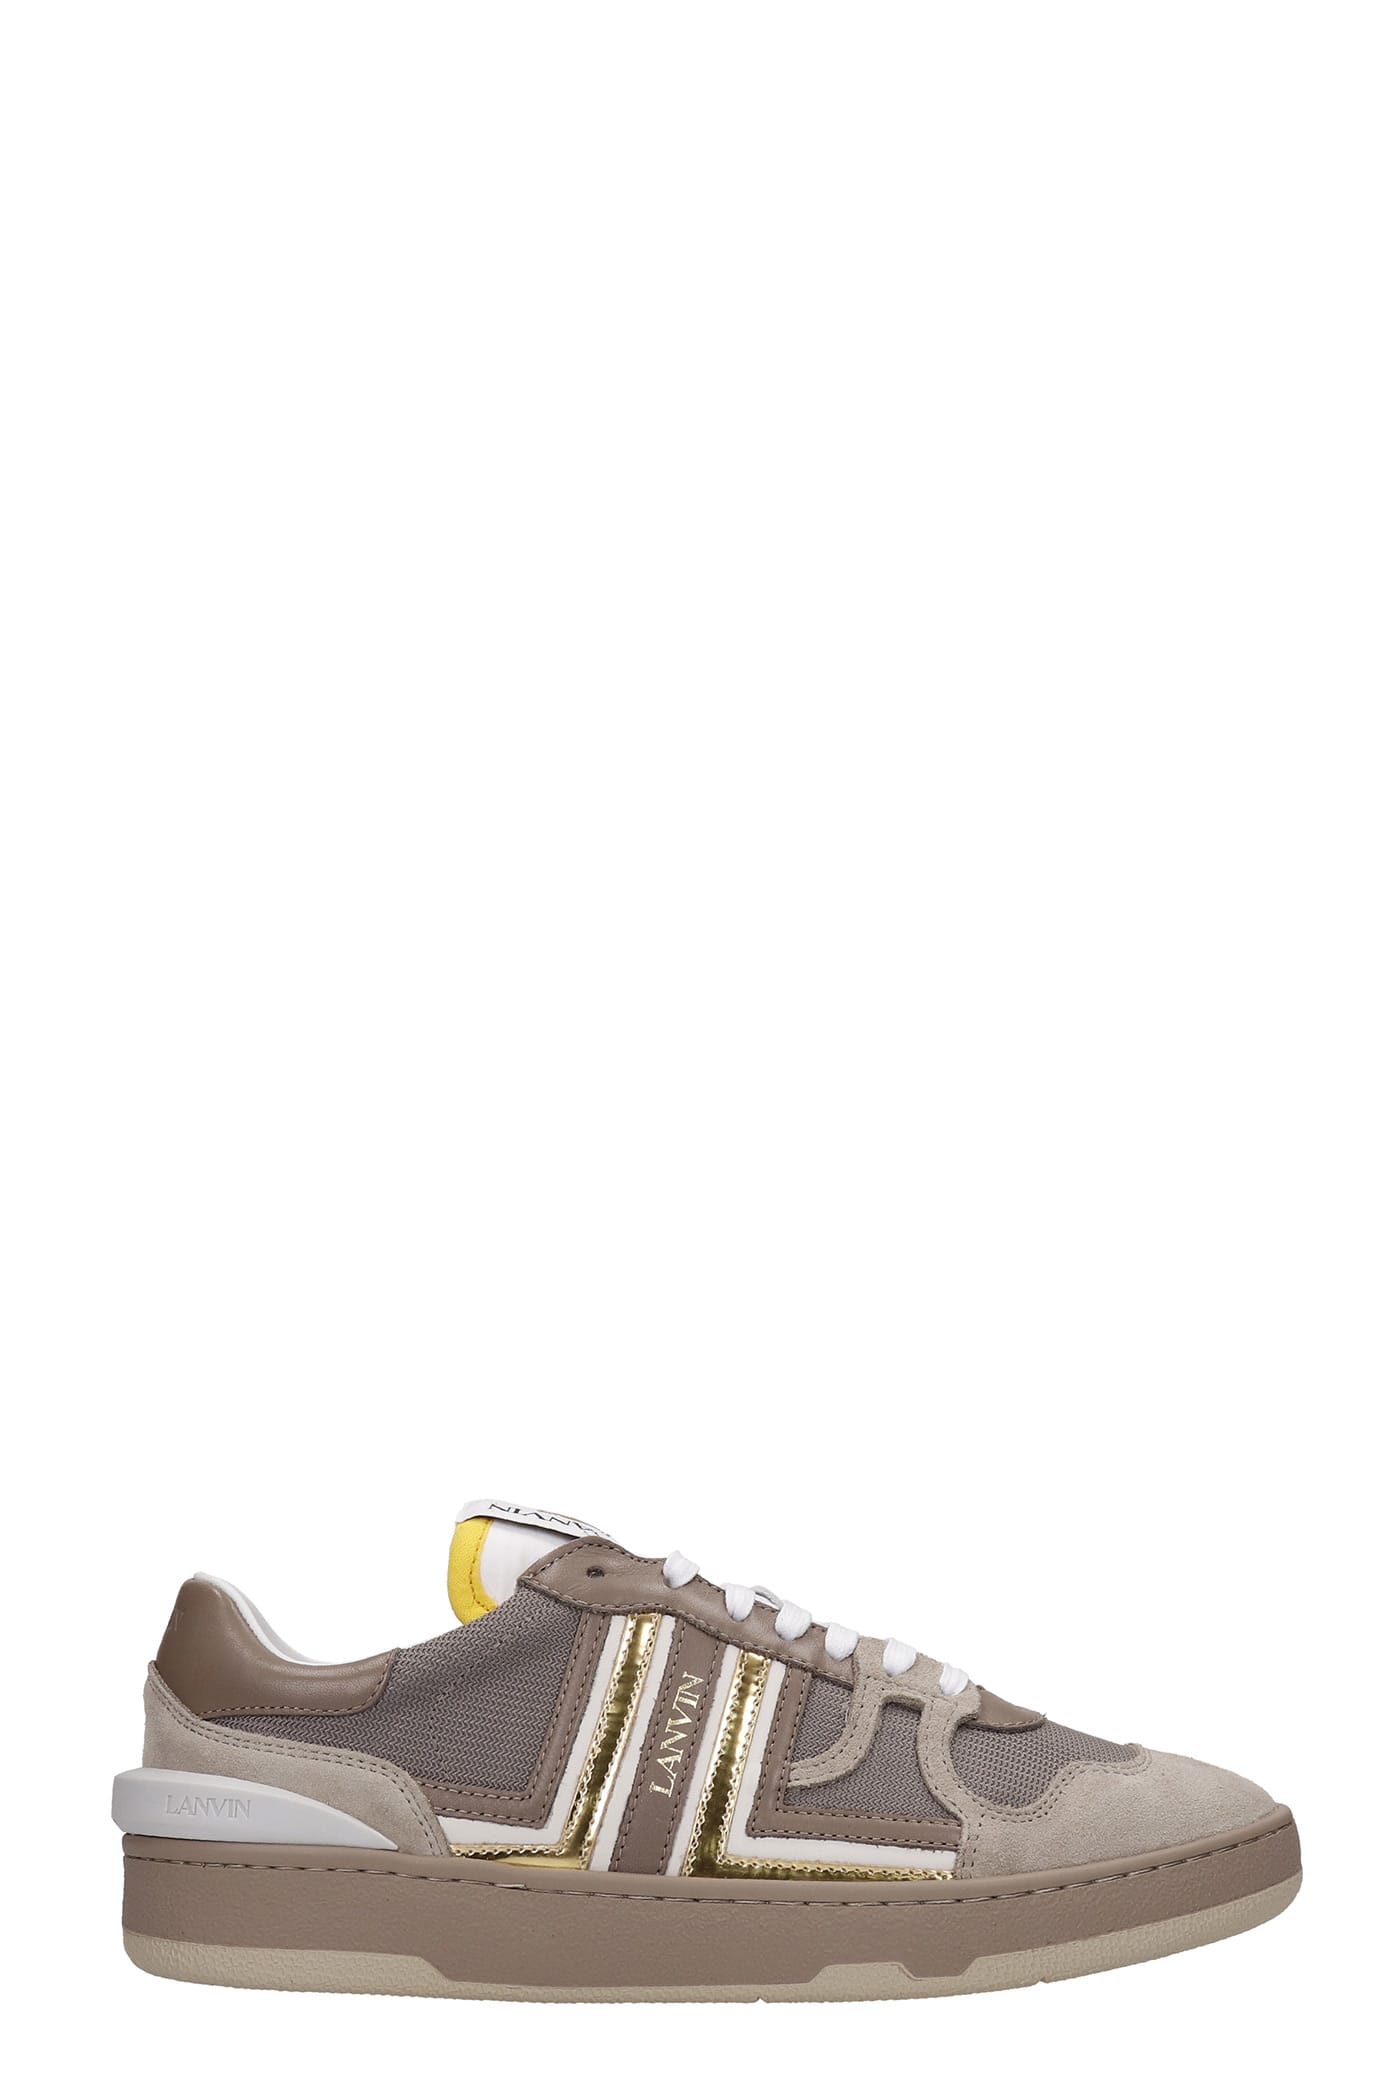 Lanvin Clay Sneakers In Grey Leather